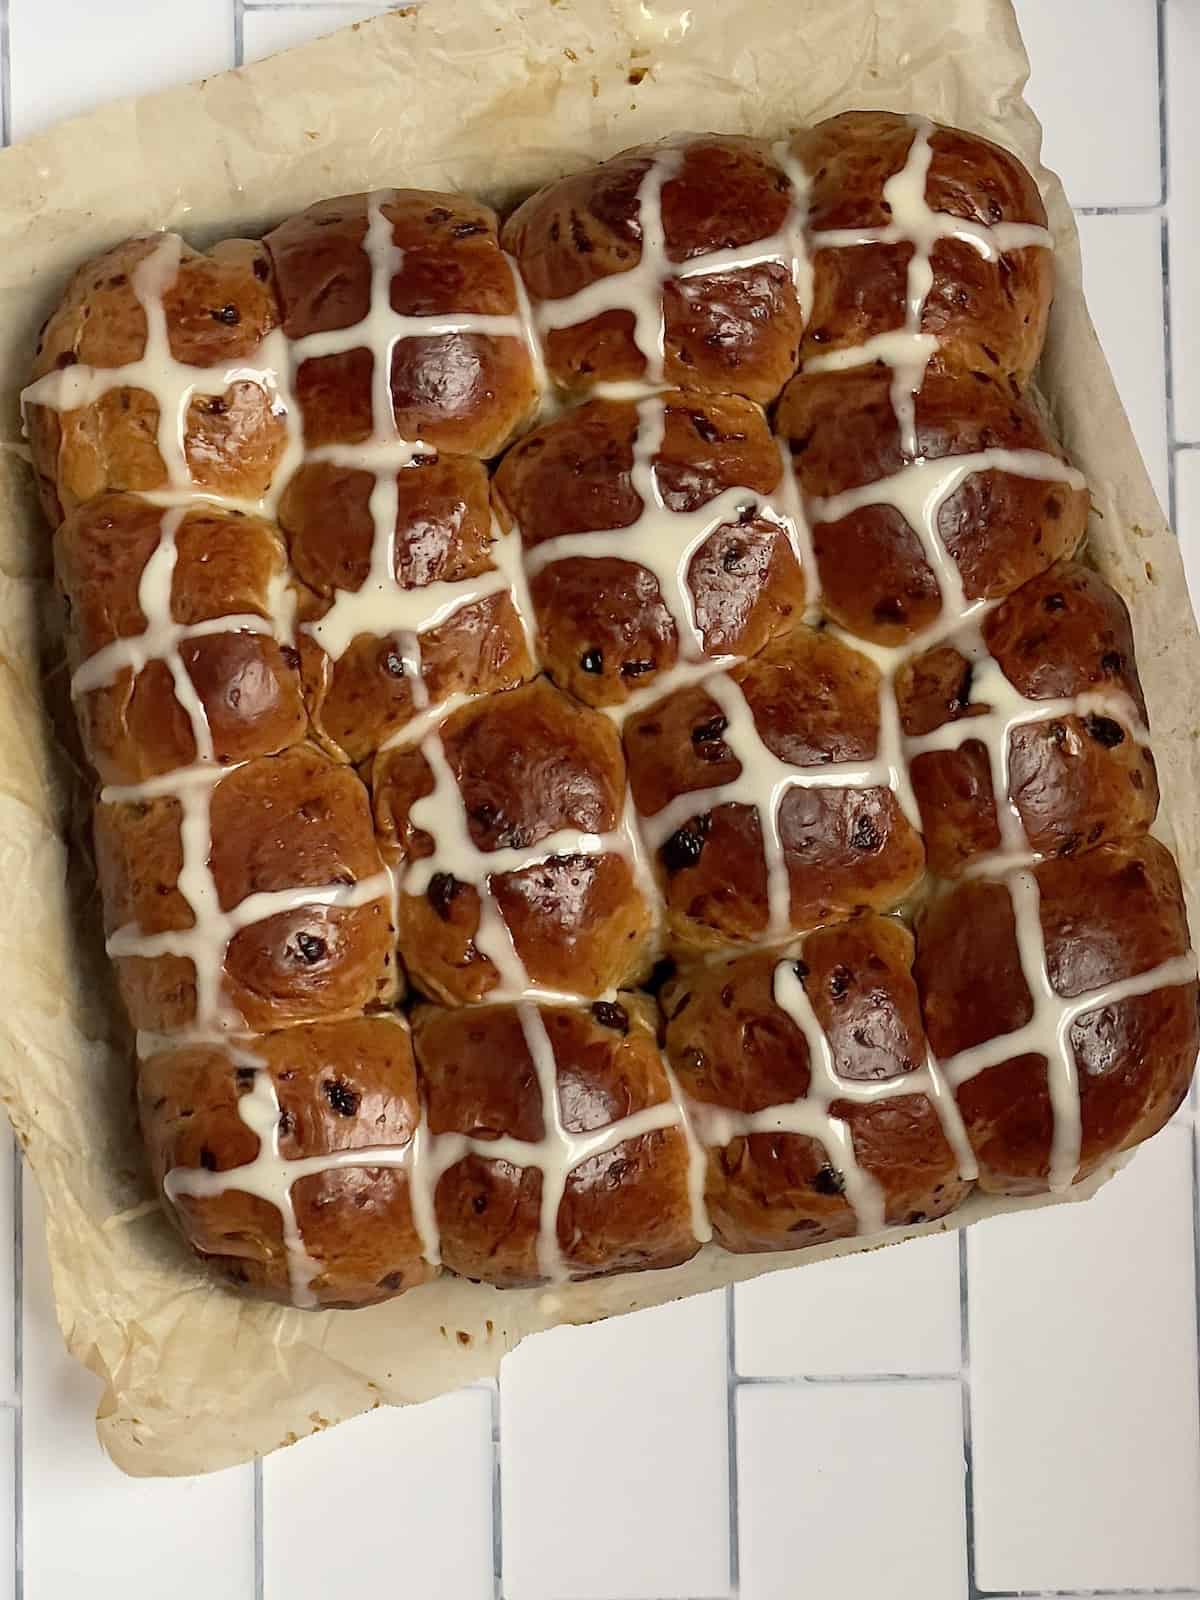 bread machine hot cross buns removed from the pan and resting